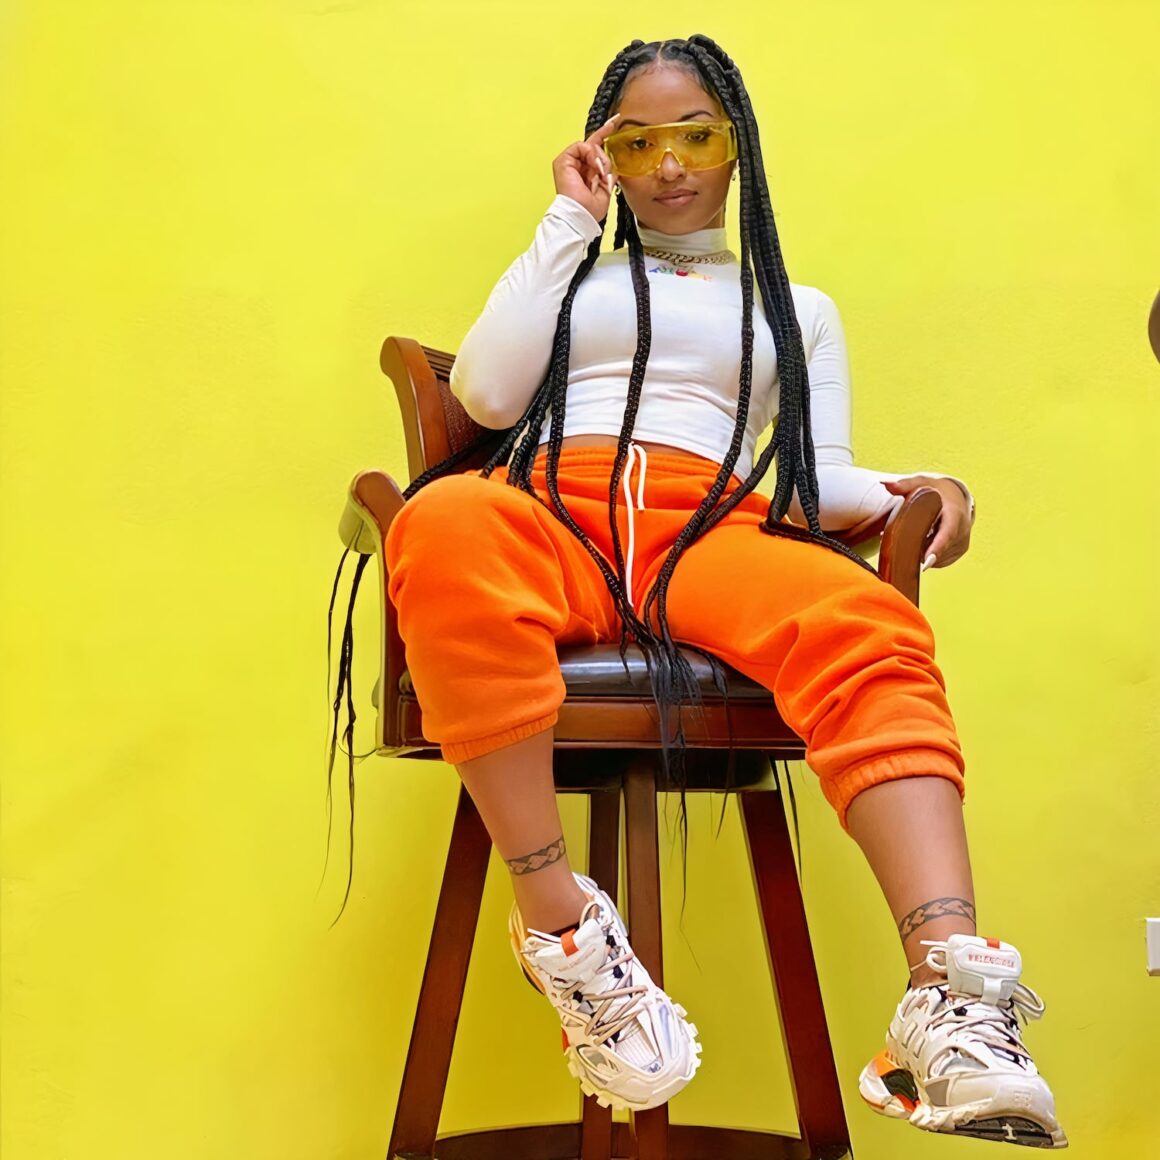 Shenseea Faces $10 Million Copyright Lawsuit Over ‘Lick’ Song With Megan Thee Stallion